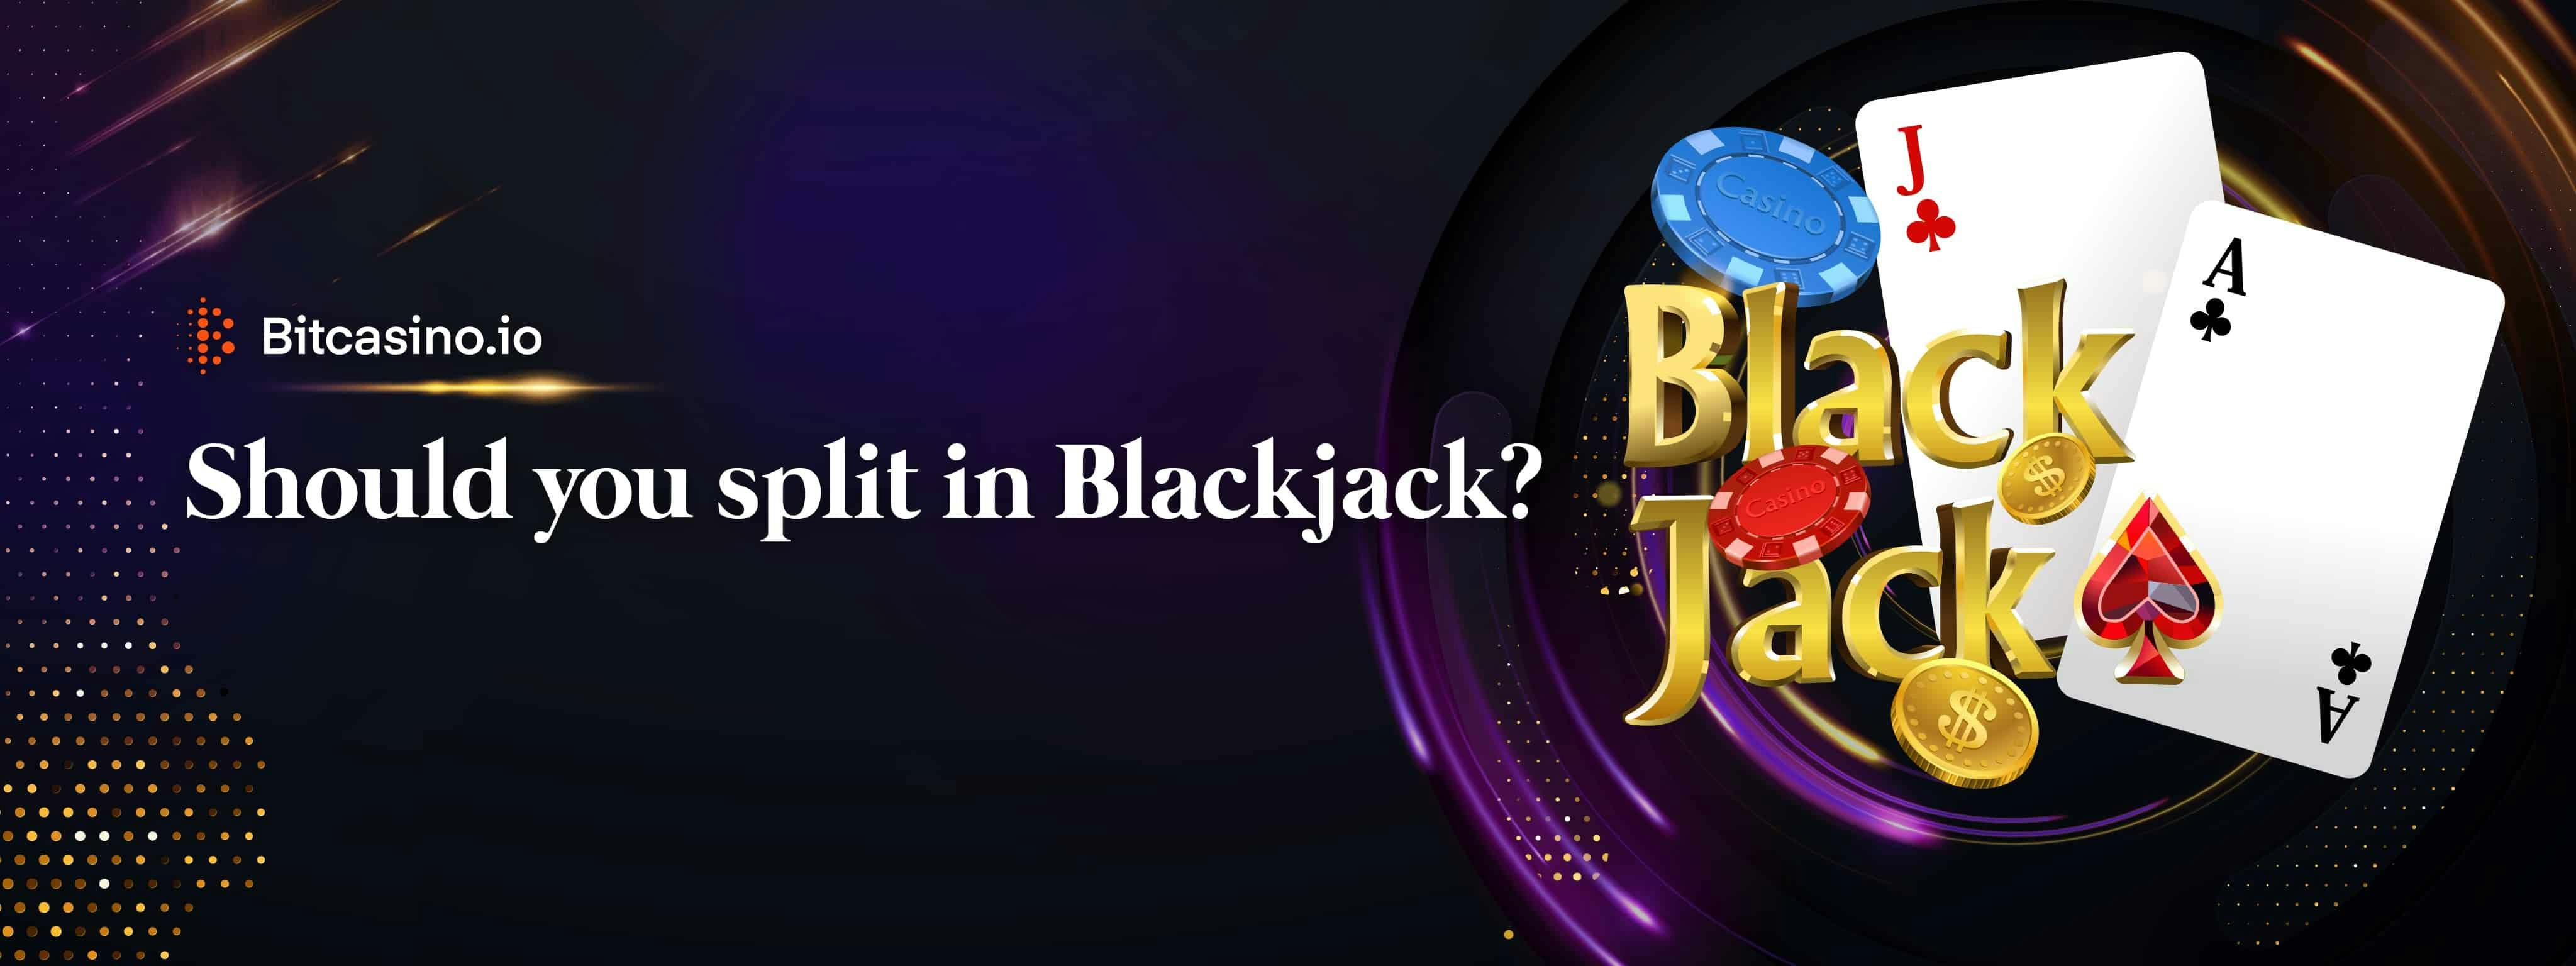 Blackjack: To split or not to split? Situations to consider